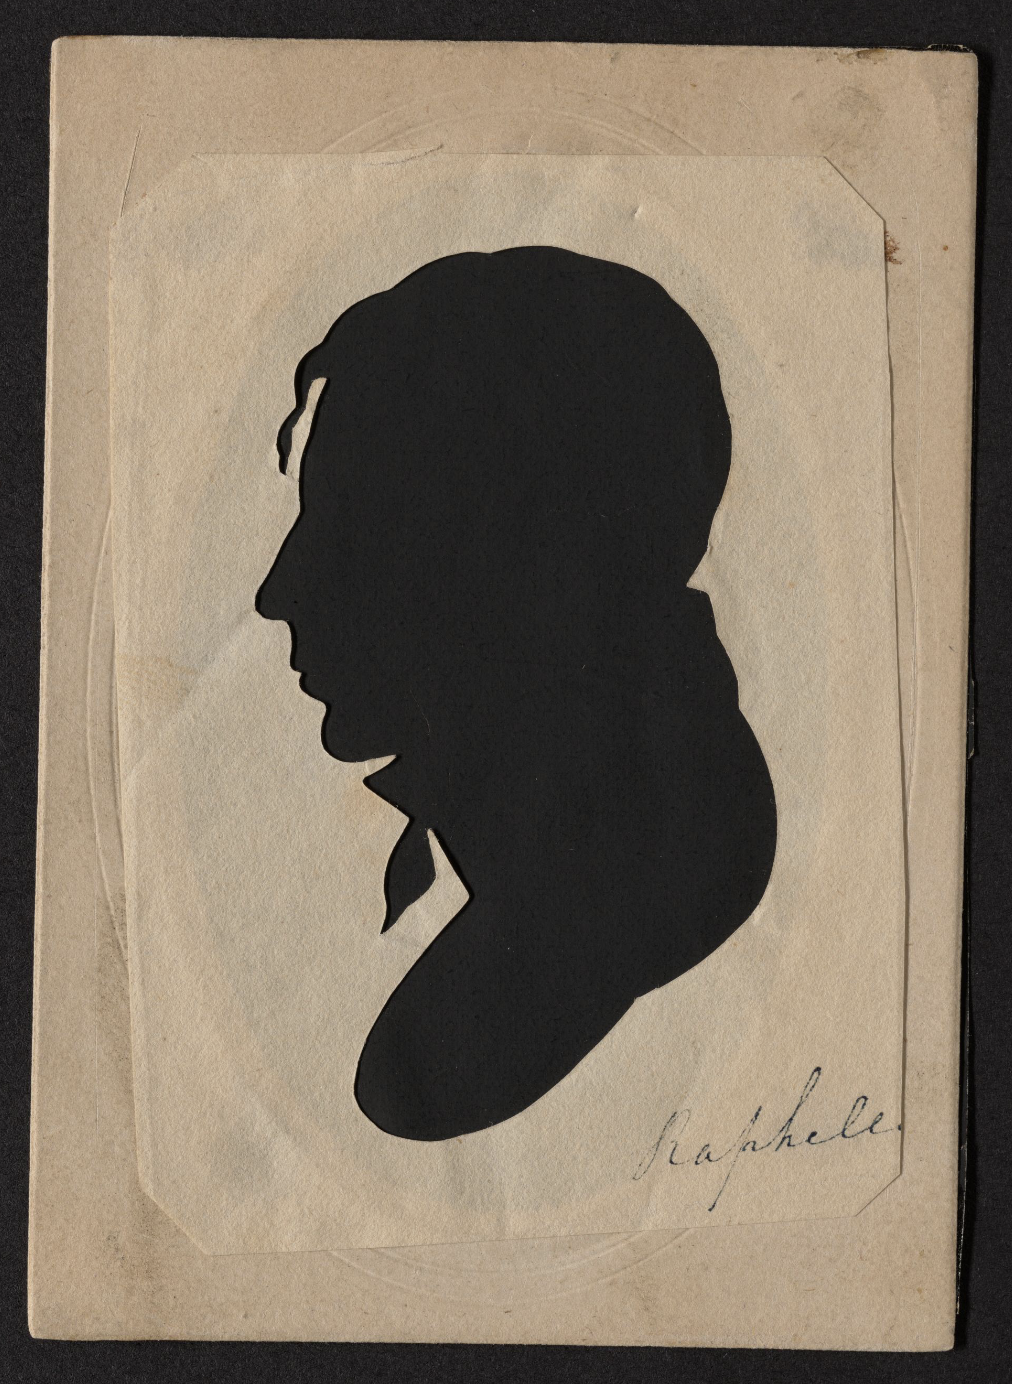 Moses Williams (American, 1777–c. 1825); Portrait of Raphaelle Peale (American, 1774–1825) Made at Peale's Museum, Philadelphia; From the Album of Peale Museum Silhouettes, 1805; Hollow-cut silhouette on paper; Sheet: 4 1/8 × 2 15/16 inches (10.5 × 7.5 cm); Gift of the McNeil Americana Collection, 2009; Accession number: 2009-18-42(76); Philadelphia Museum of Art